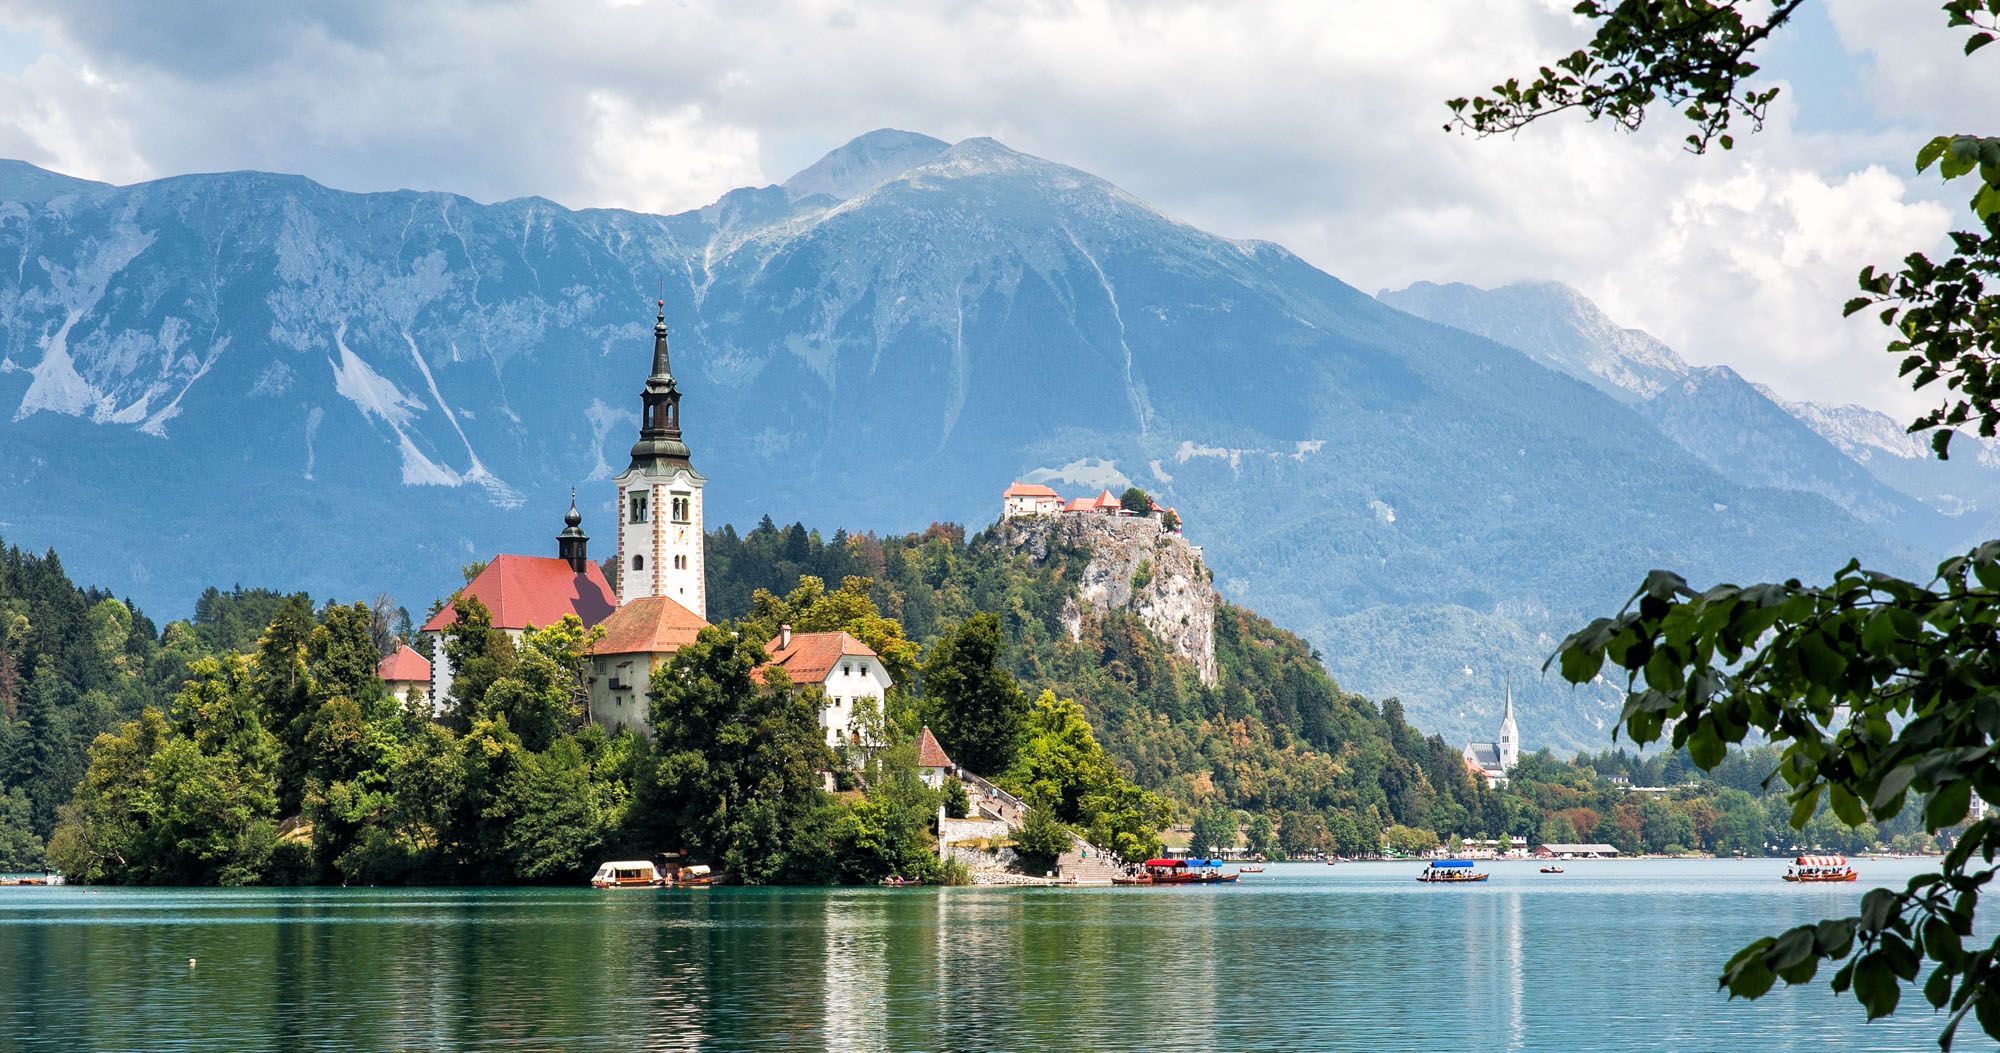 Featured image for “8 Amazing Things to Do in Lake Bled, Slovenia”